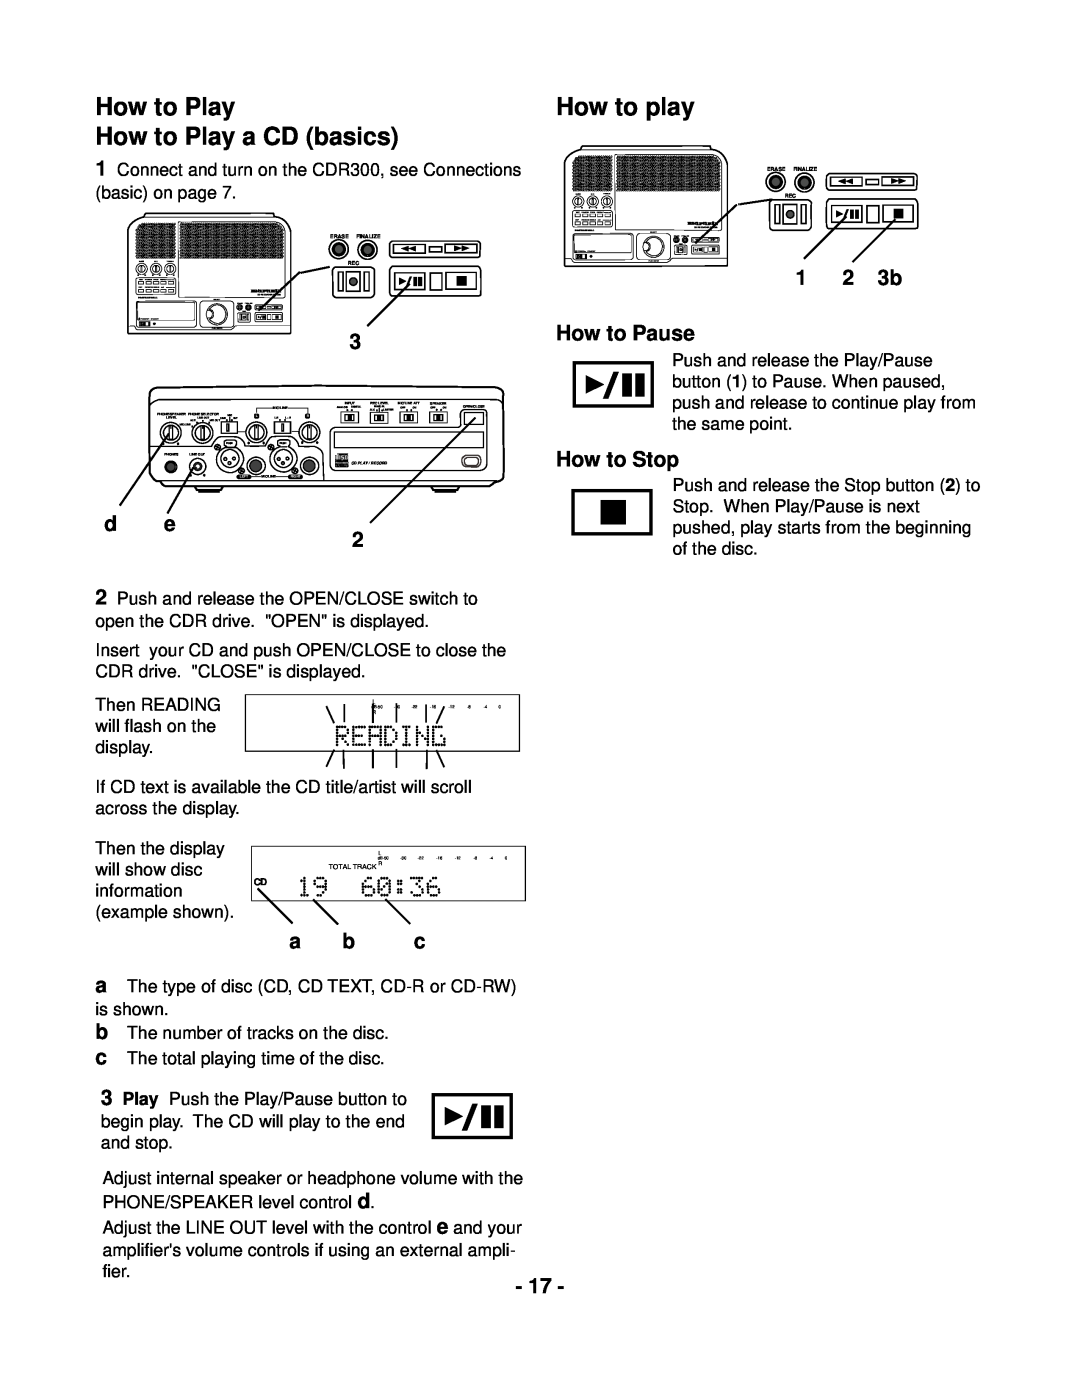 Marantz CDR300 manual How to Play How to Play a CD basics, How to play, 1 2 3b, d e, How to Pause, How to Stop 